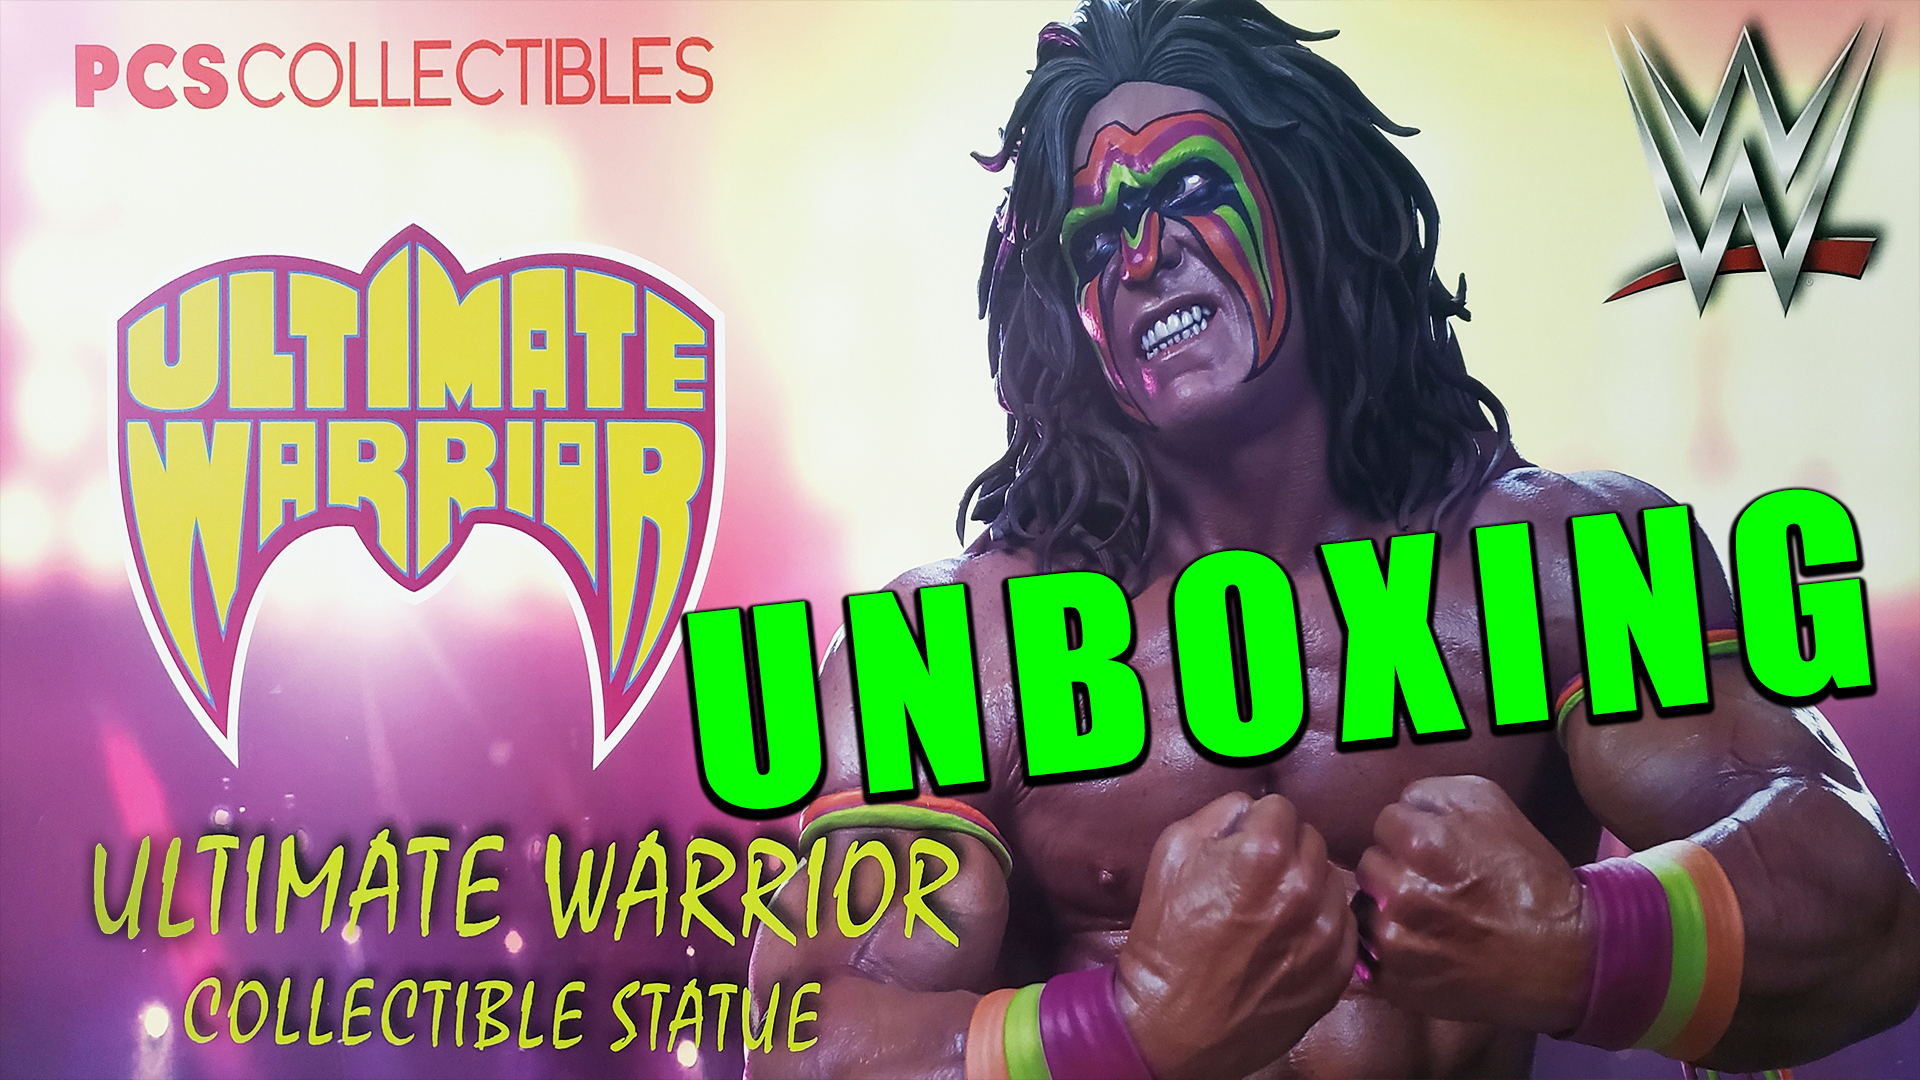 ultimate-warrior-sideshow-collectibles-pcs-toys-statue-unboxing-lord-kayoss